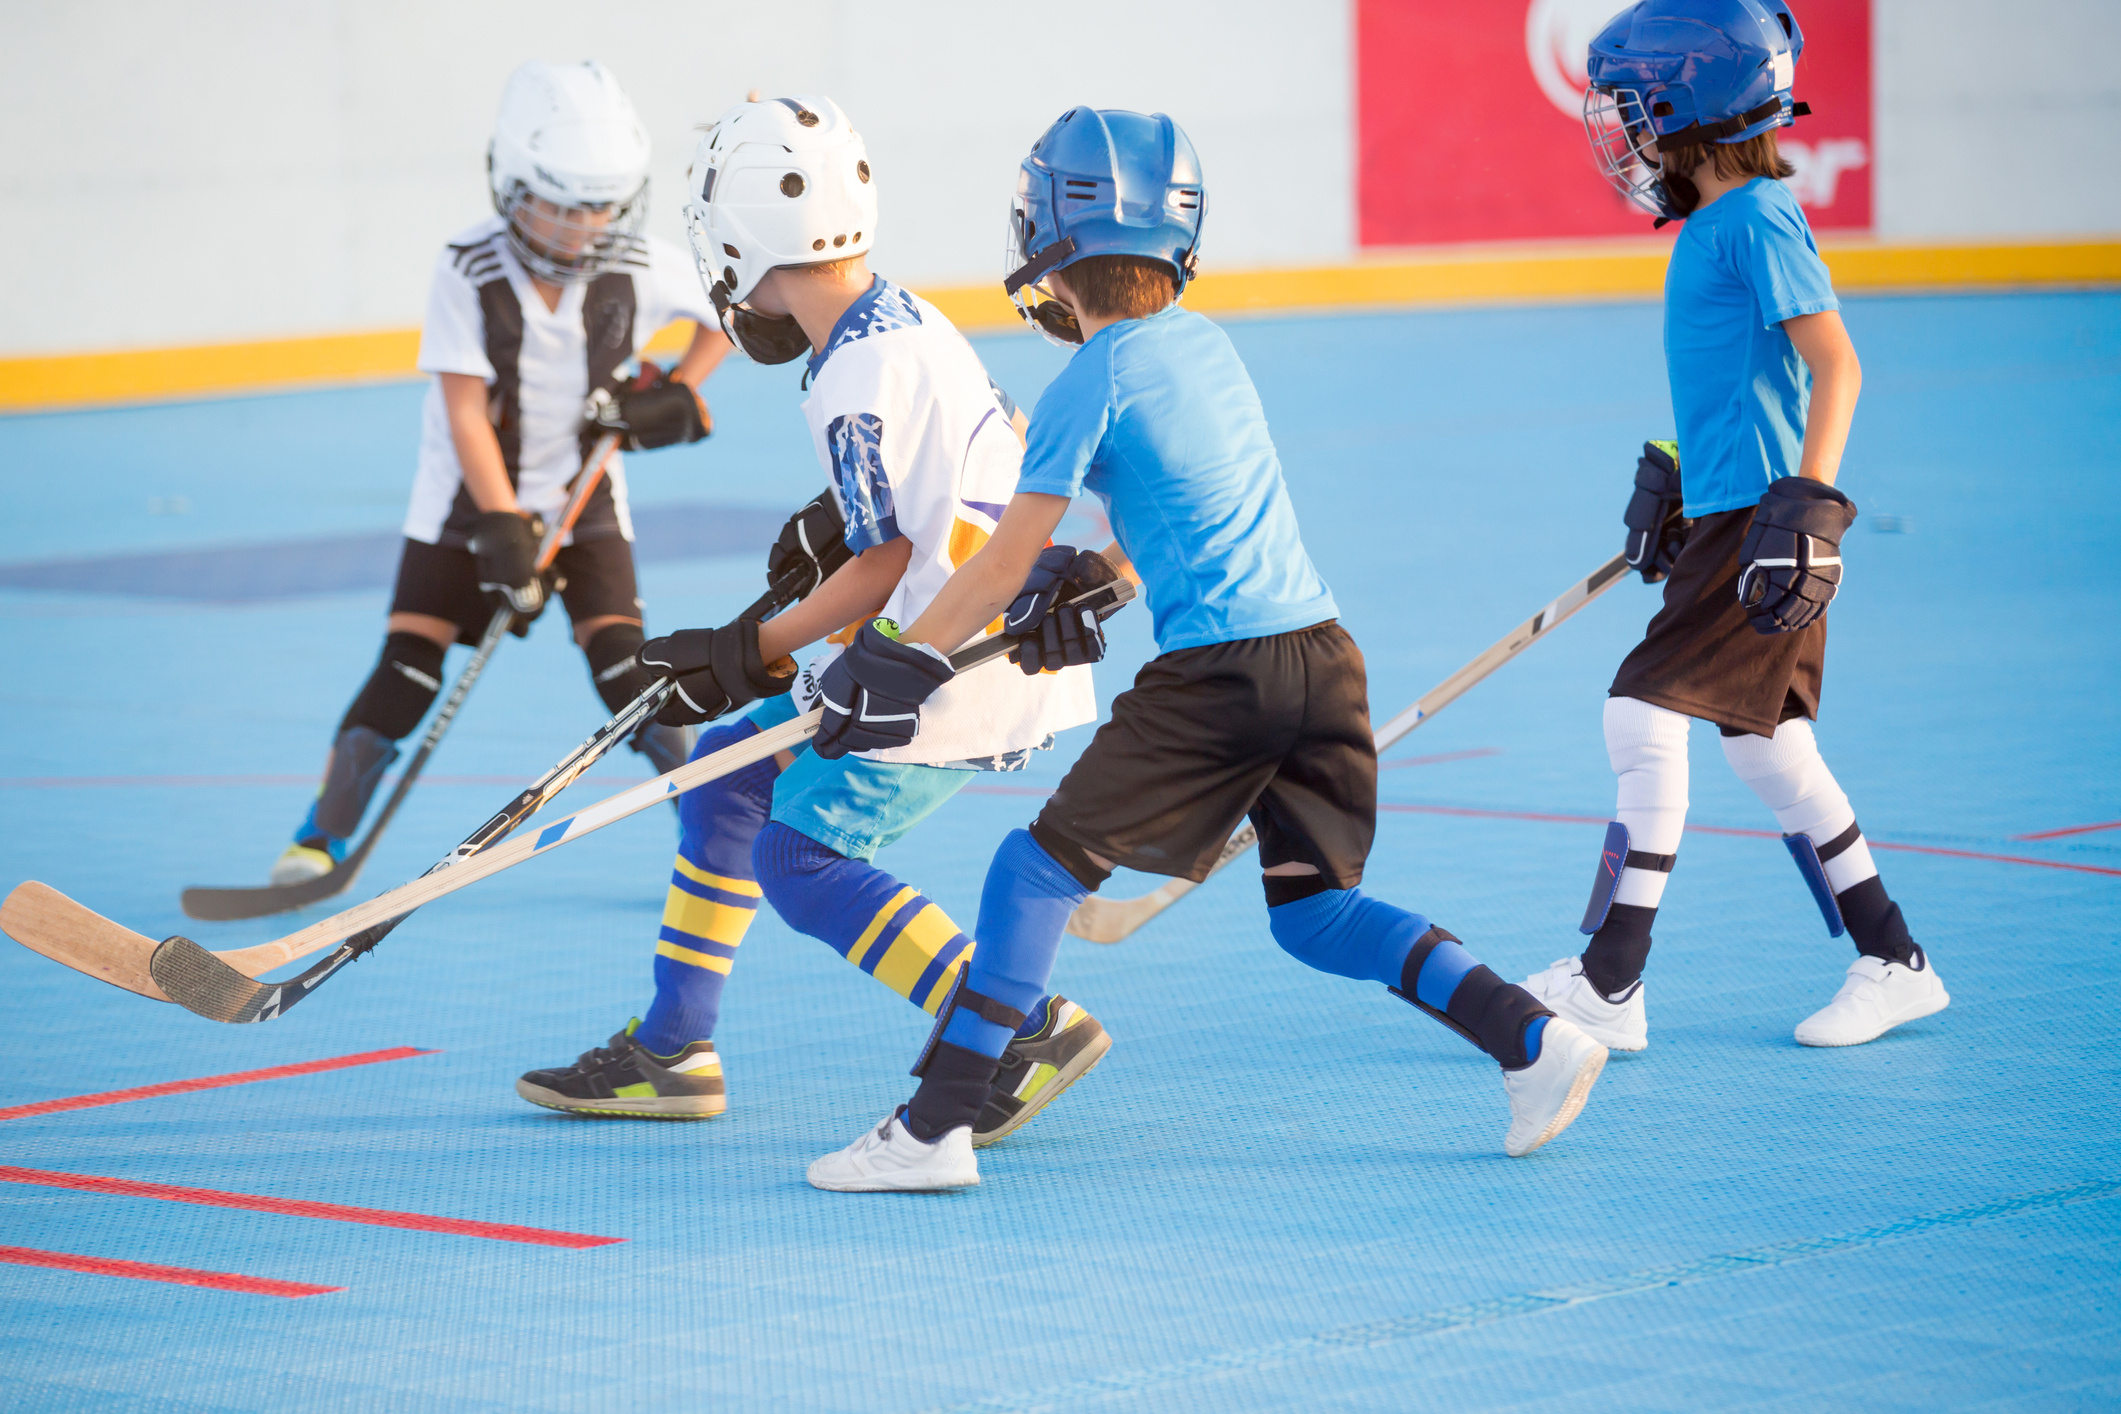 Ball Hockey: Street Hockey, Outdoor Surface, Kids Playing, Sports Gear, Outdoor Game. 2130x1420 HD Background.